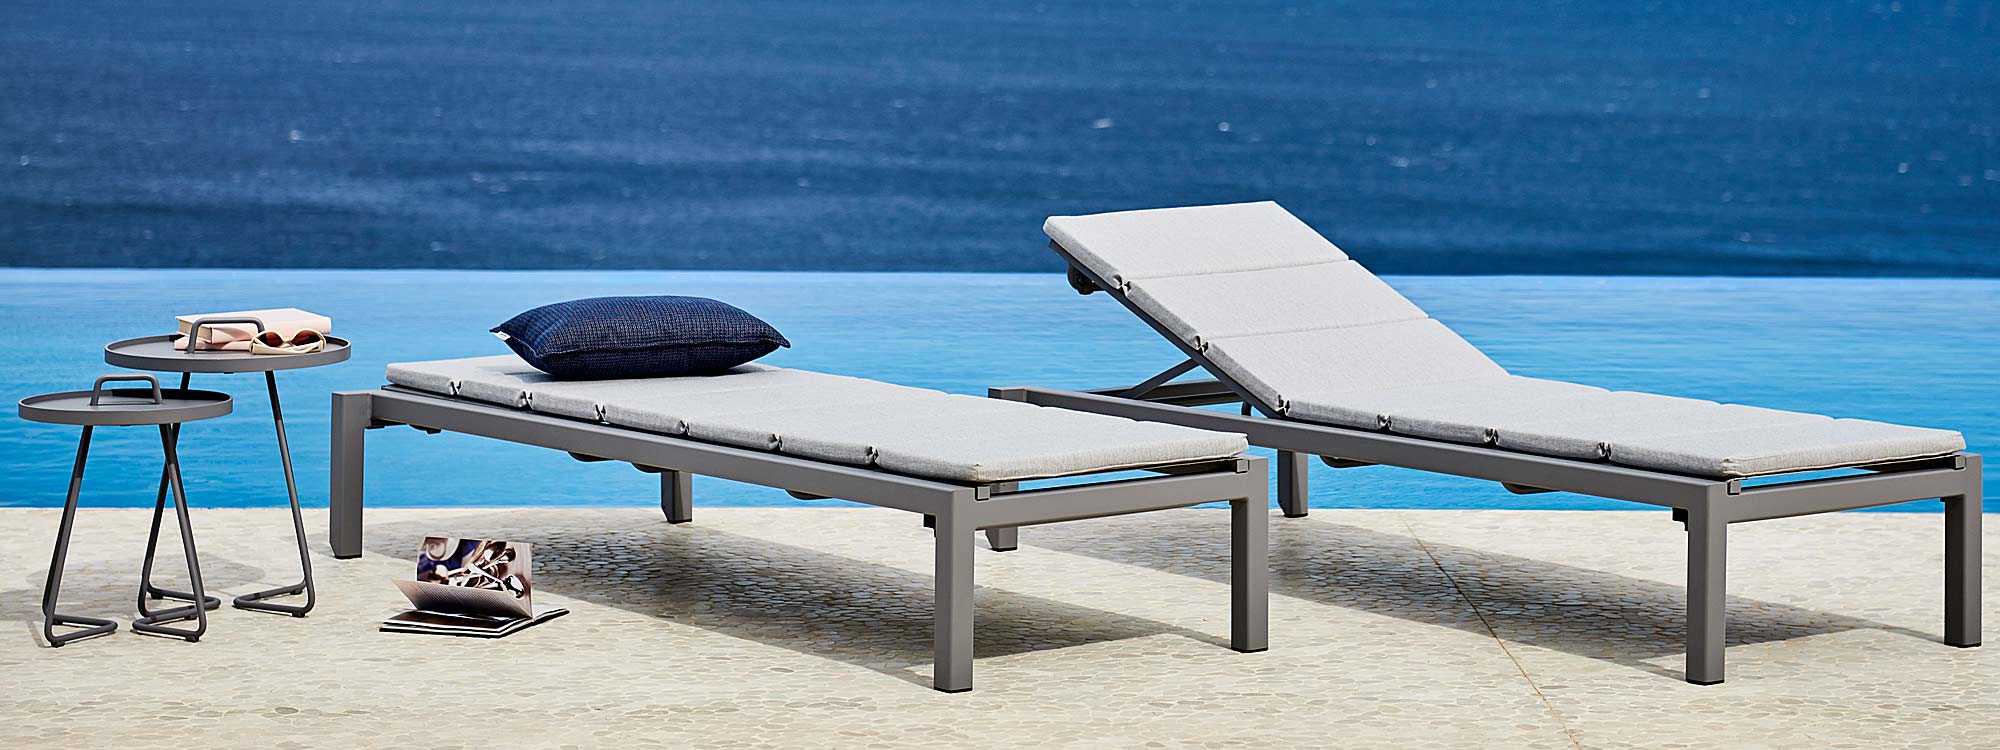 Image of pair of light-grey Relax sun loungers with light-grey cushions by Cane-line, shown on poolside